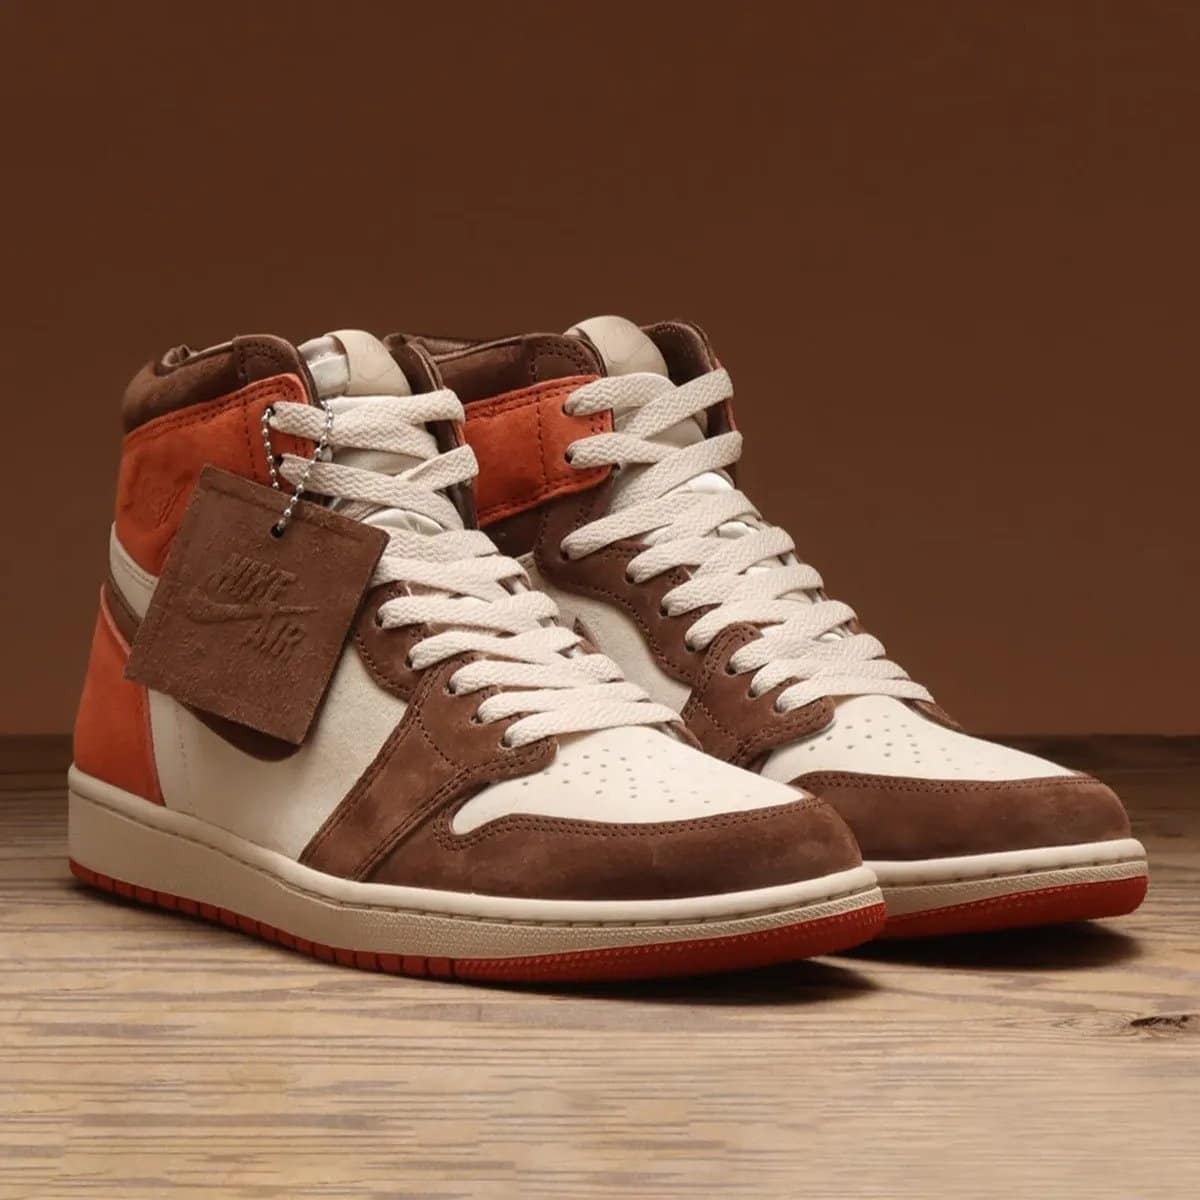 Nike Air Jordan 1 Retro High OG “Dusted Clay” Is Ready To Sweep You Off Your Feet